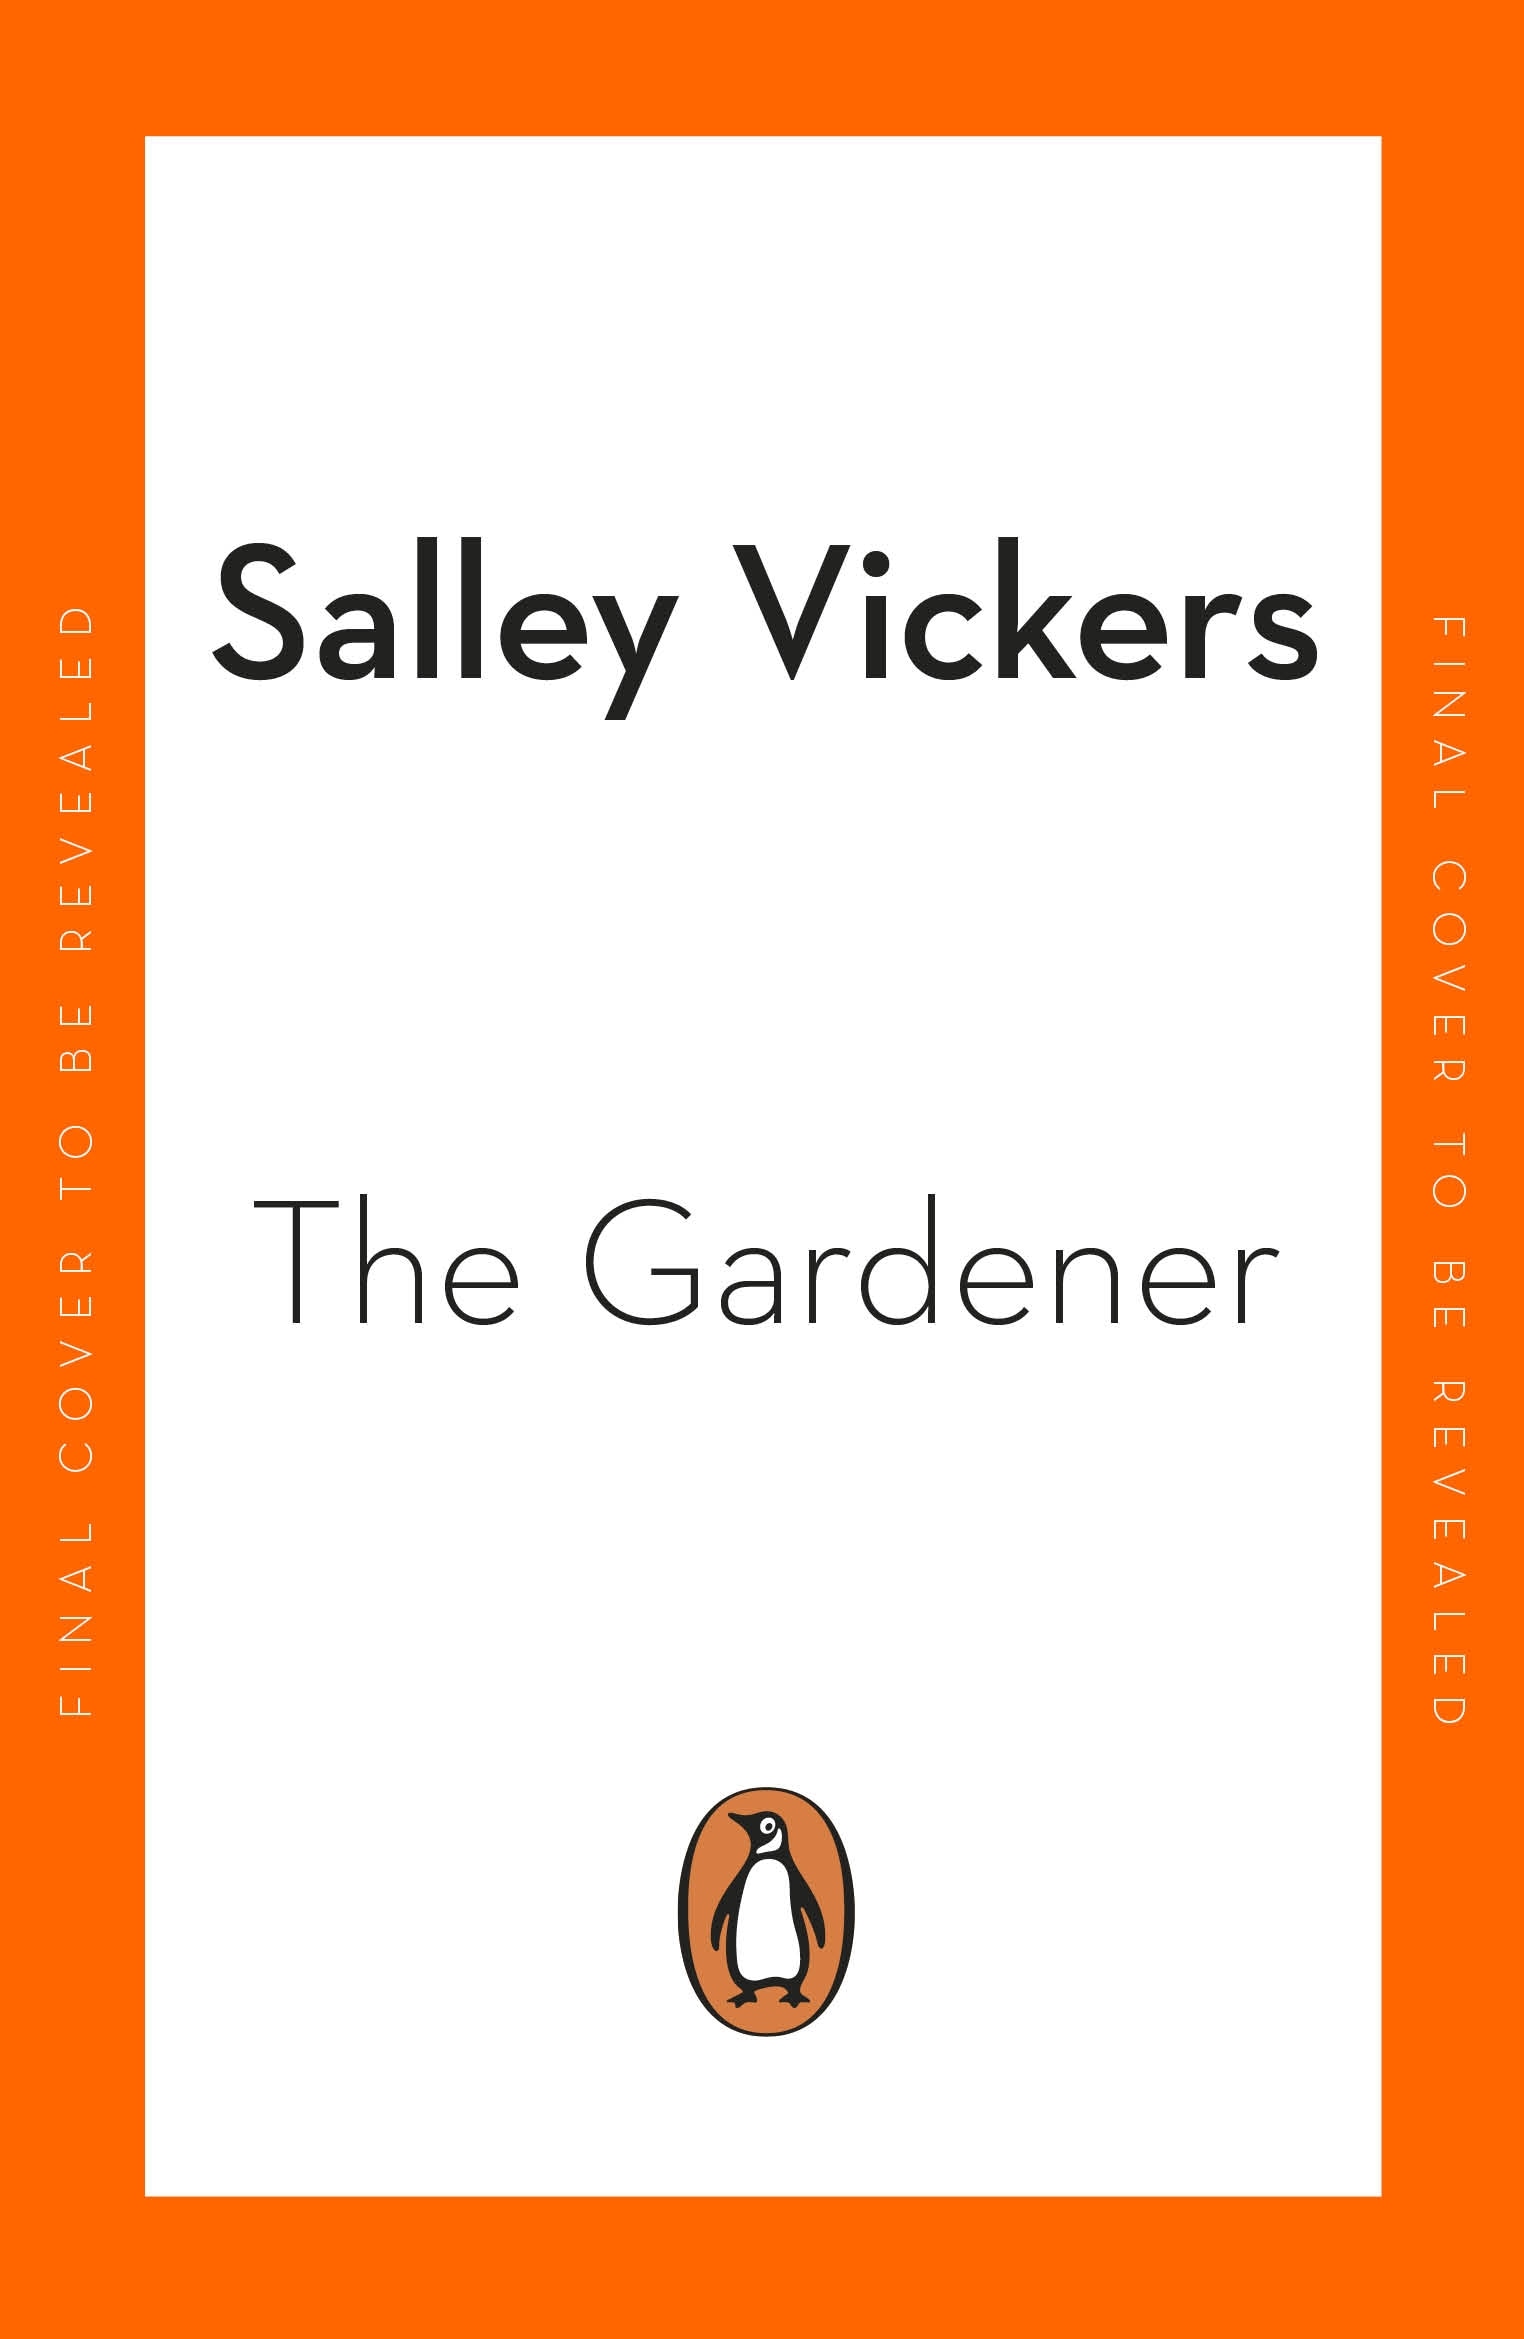 Book “The Gardener” by Salley Vickers — September 1, 2022